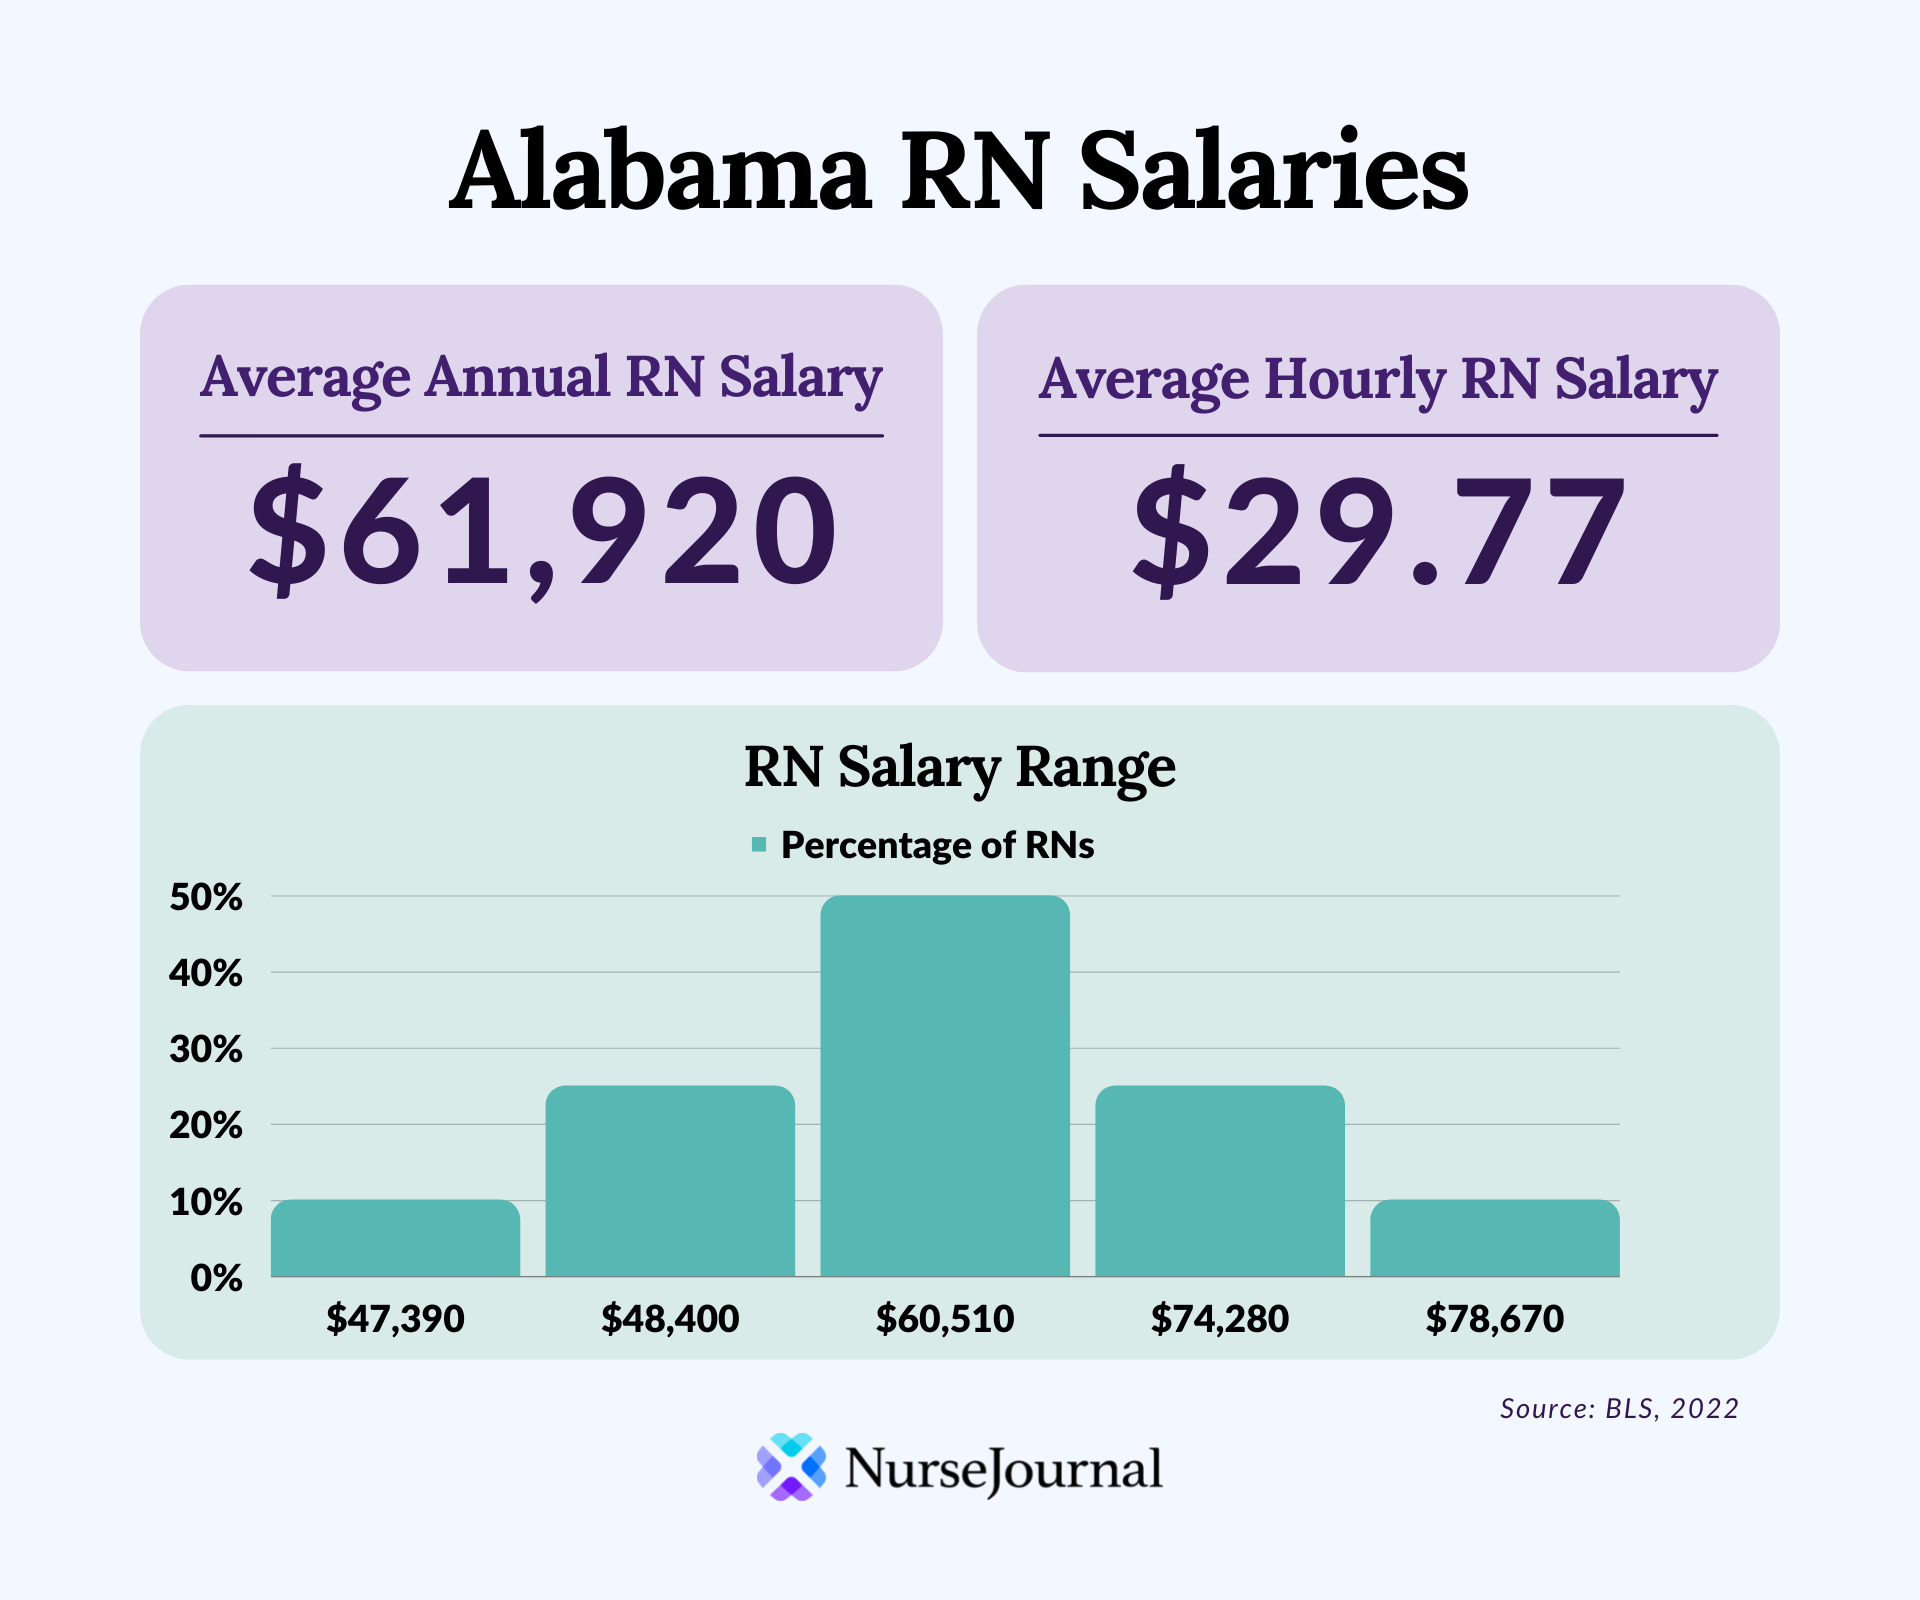 Infographic of registered nursing salary data in Alabama. The average annual RN salary is $61,920. The average hourly RN salary is $29.77. Average RN salaries range from $47,390 among the bottom 10th percentile of earners to $78,670 among the top 90th percentile of earners.